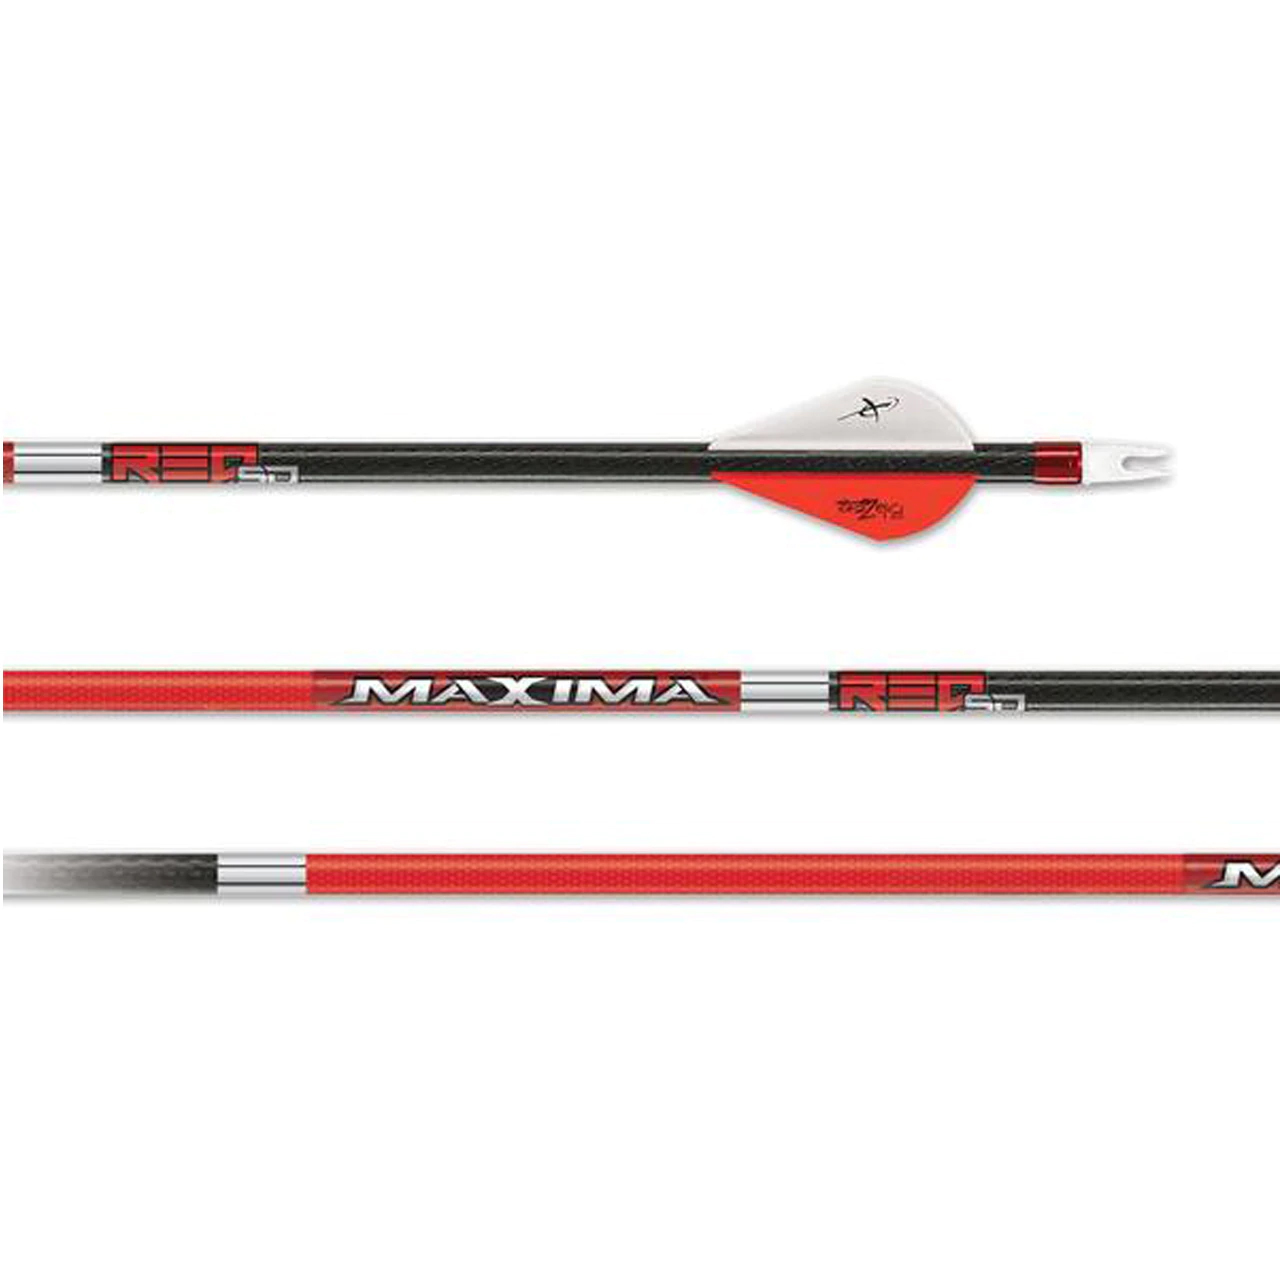 250 Factory Fletched hunting Arrows 6 Pack Carbon Express Maxima Red SD 350 